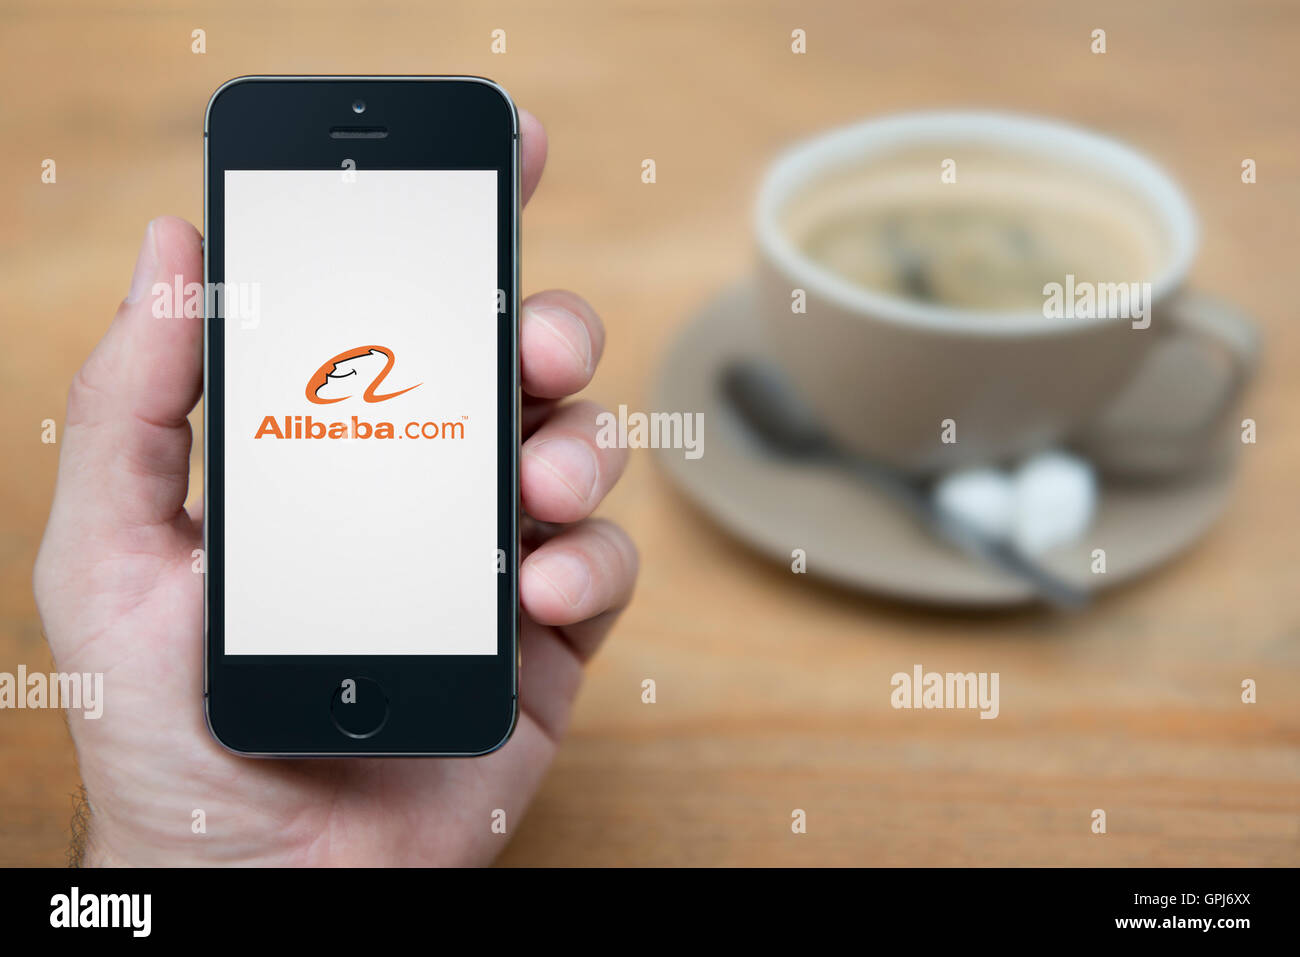 A man looks at his iPhone which displays the Alibaba logo, while sat with a cup of coffee (Editorial use only). Stock Photo